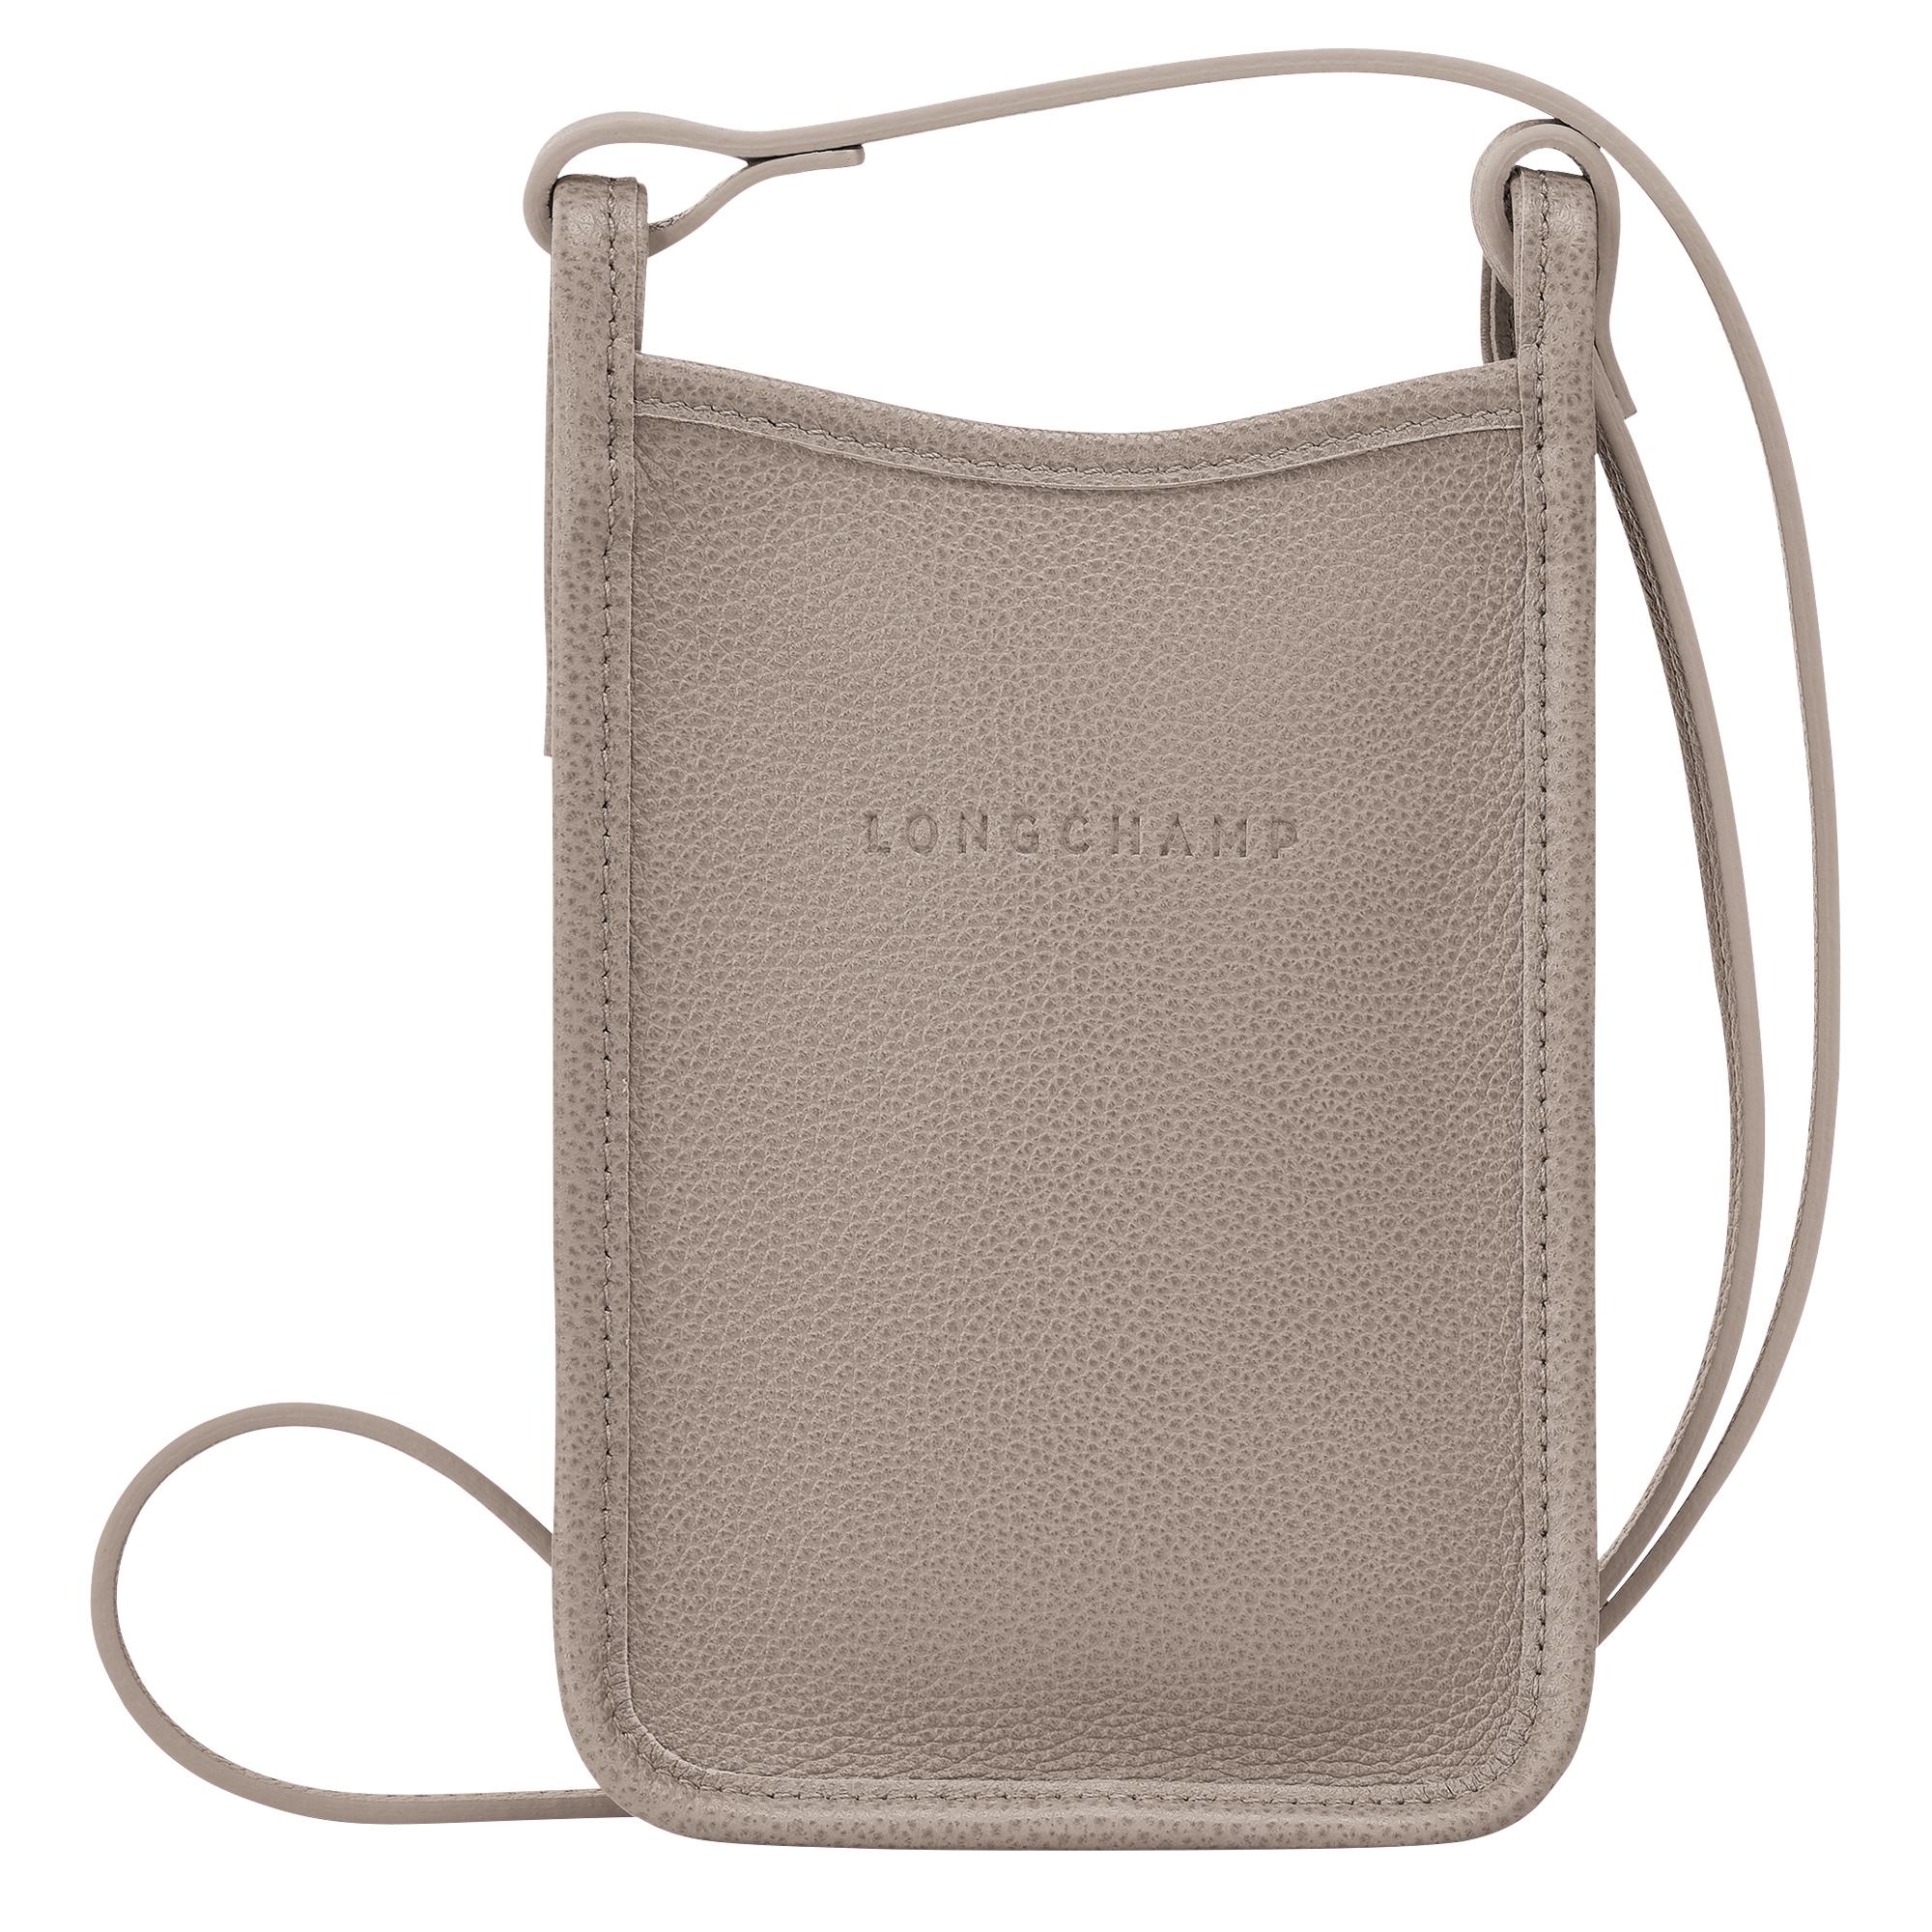 Le Pliage Original Pouch with handle Paper - Recycled canvas (34175089P71)